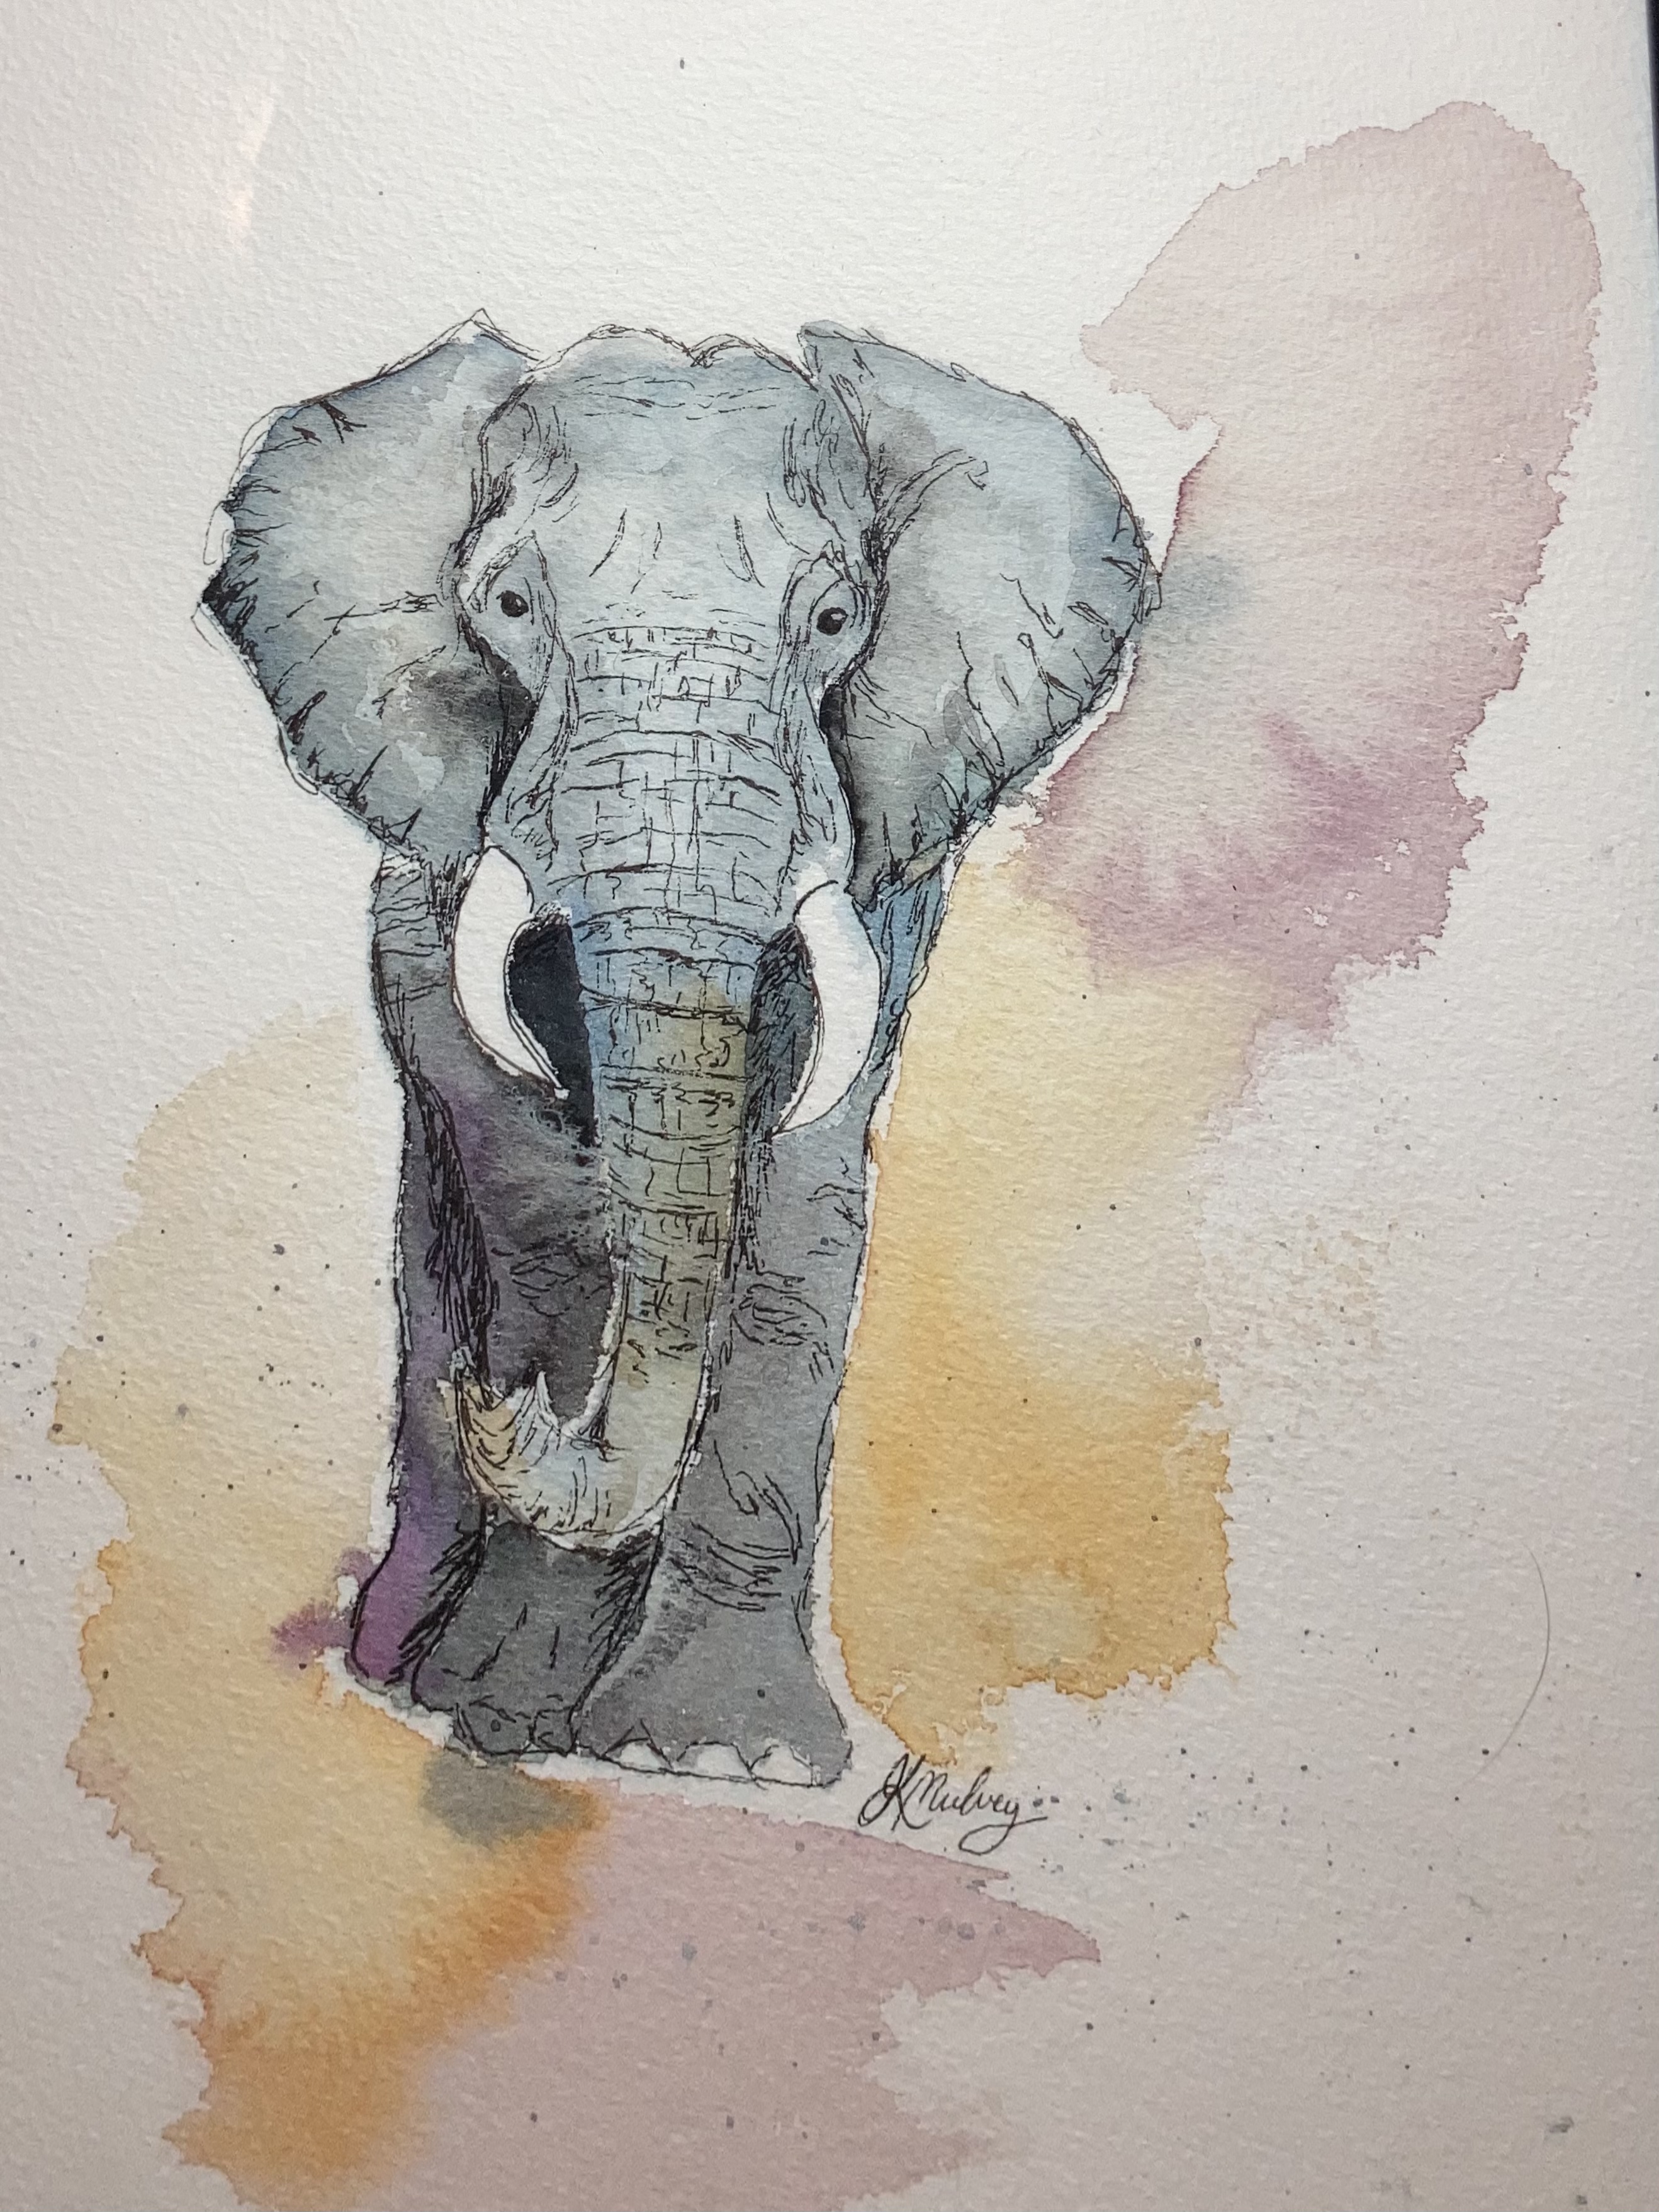 A watercolour elephant illustration as a gift for a friend